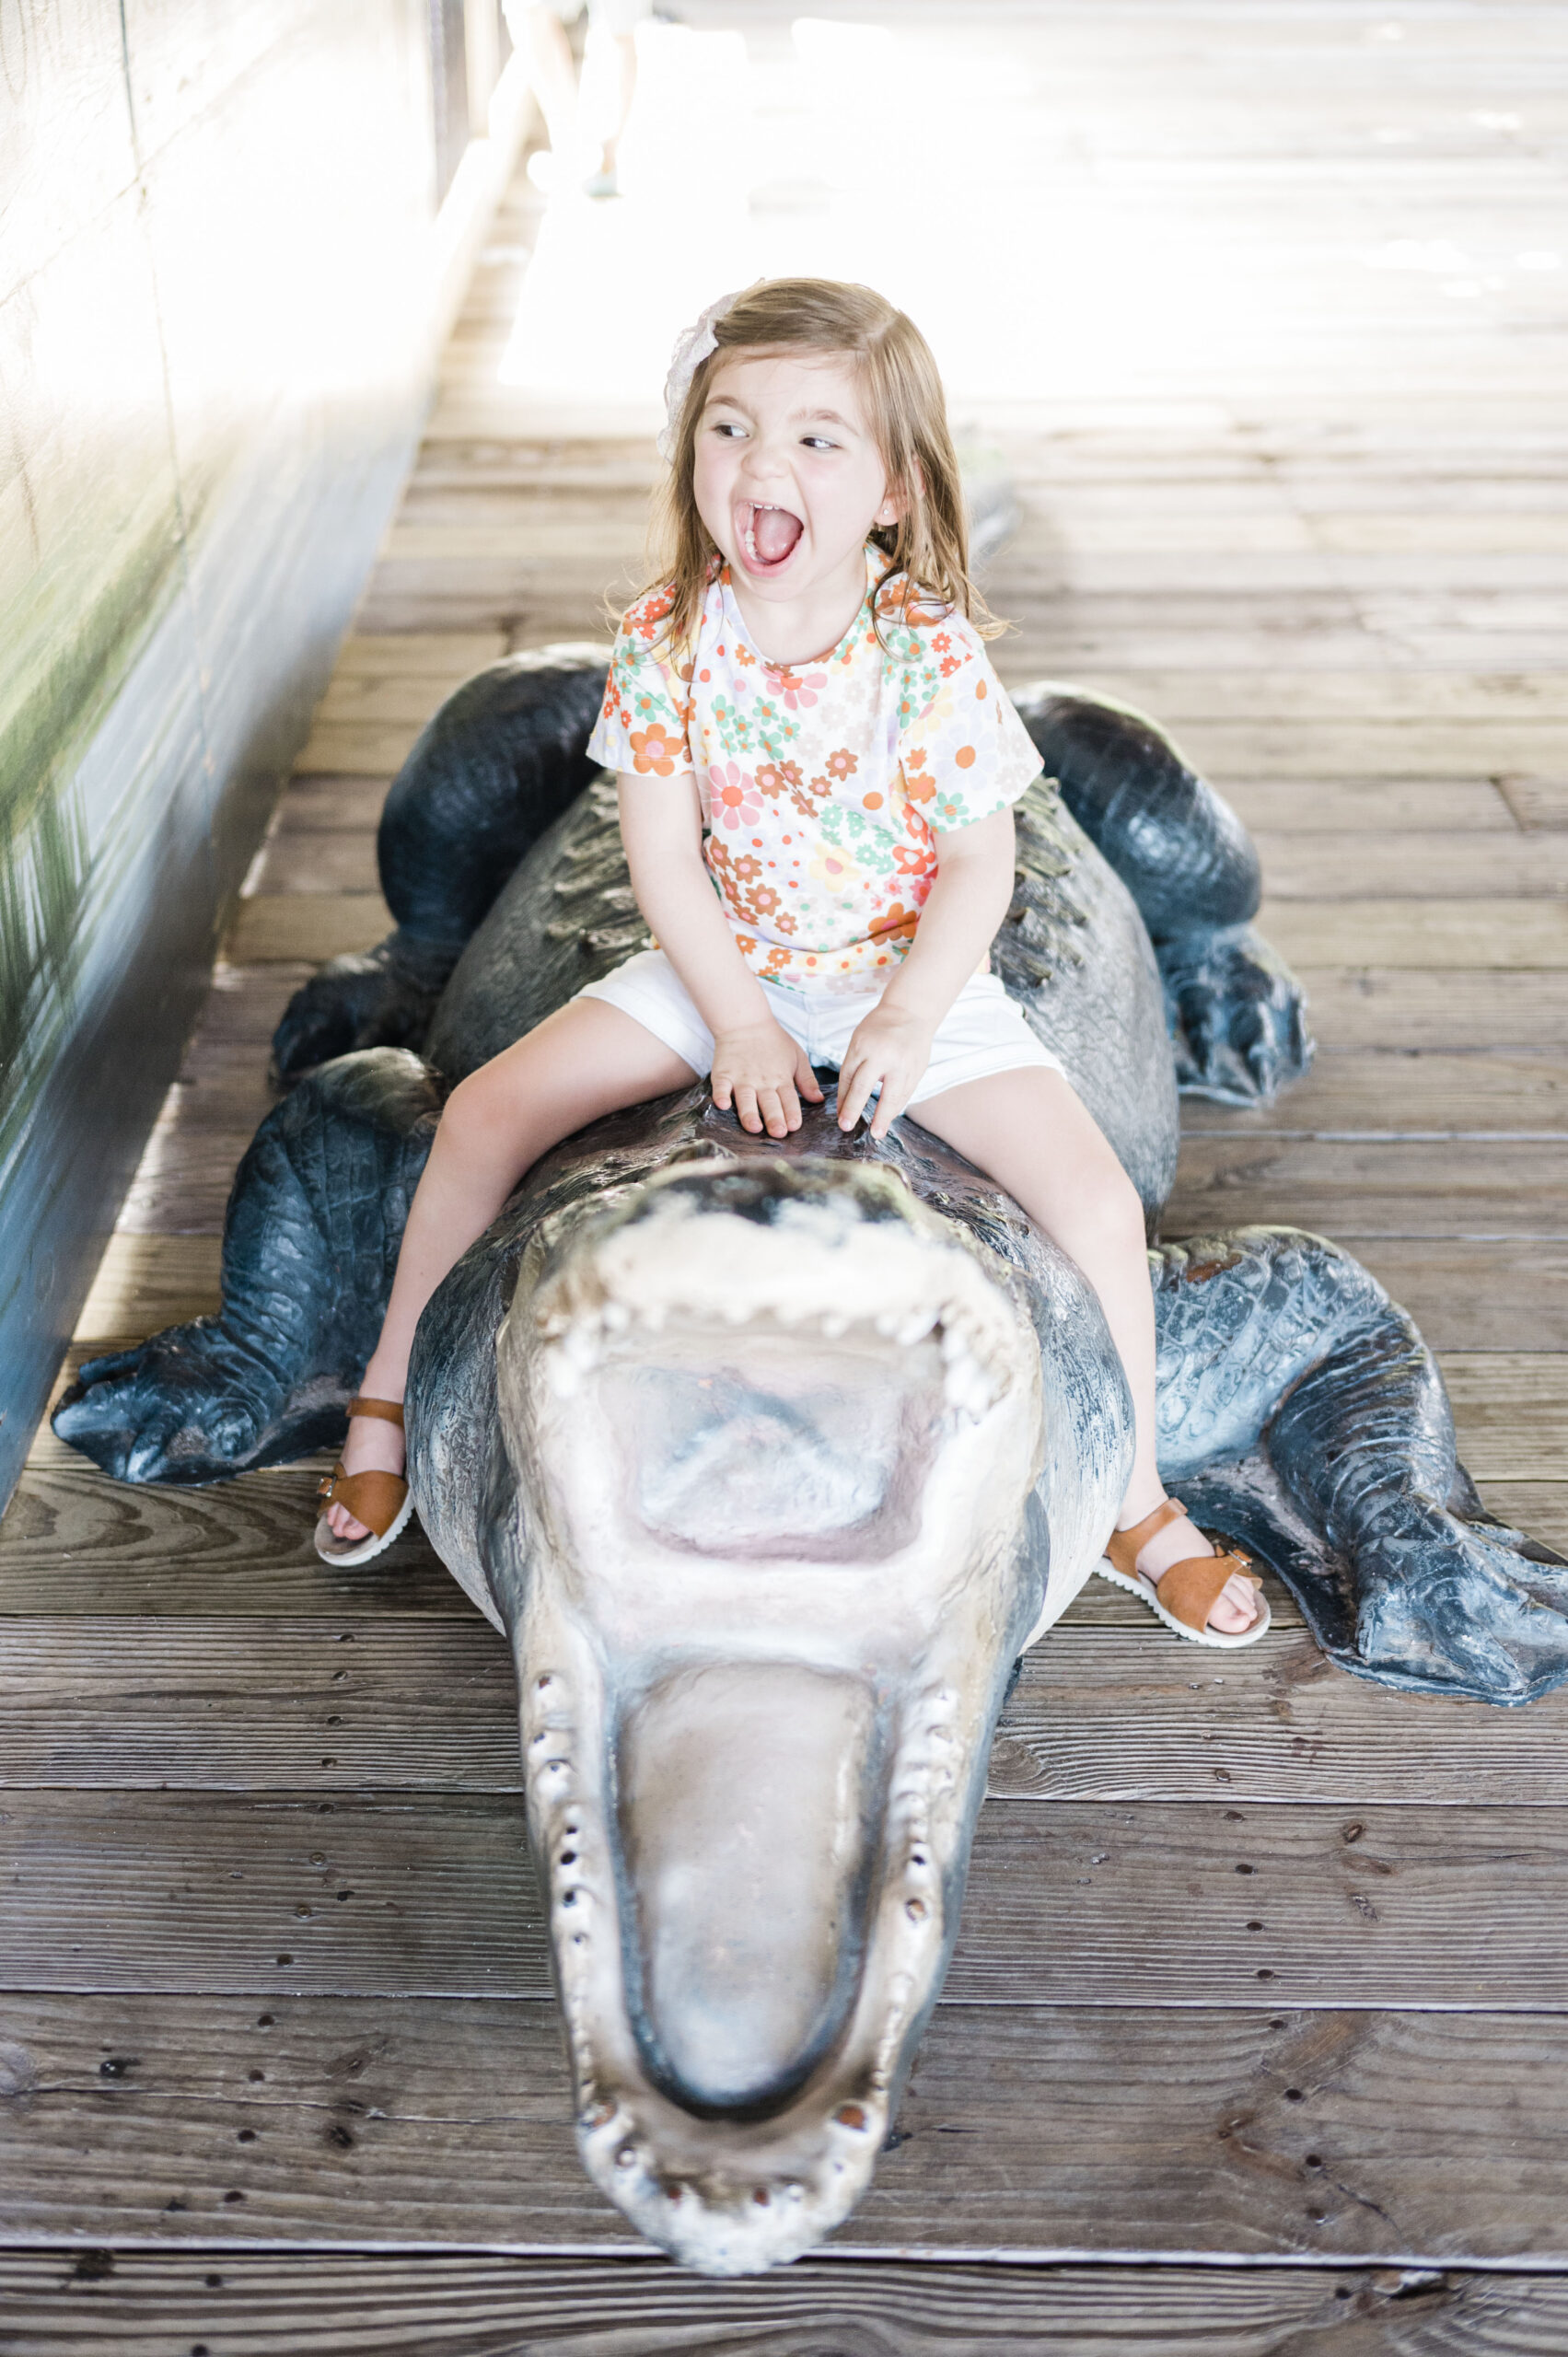 little girl with making a screaming face sitting on fake alligator